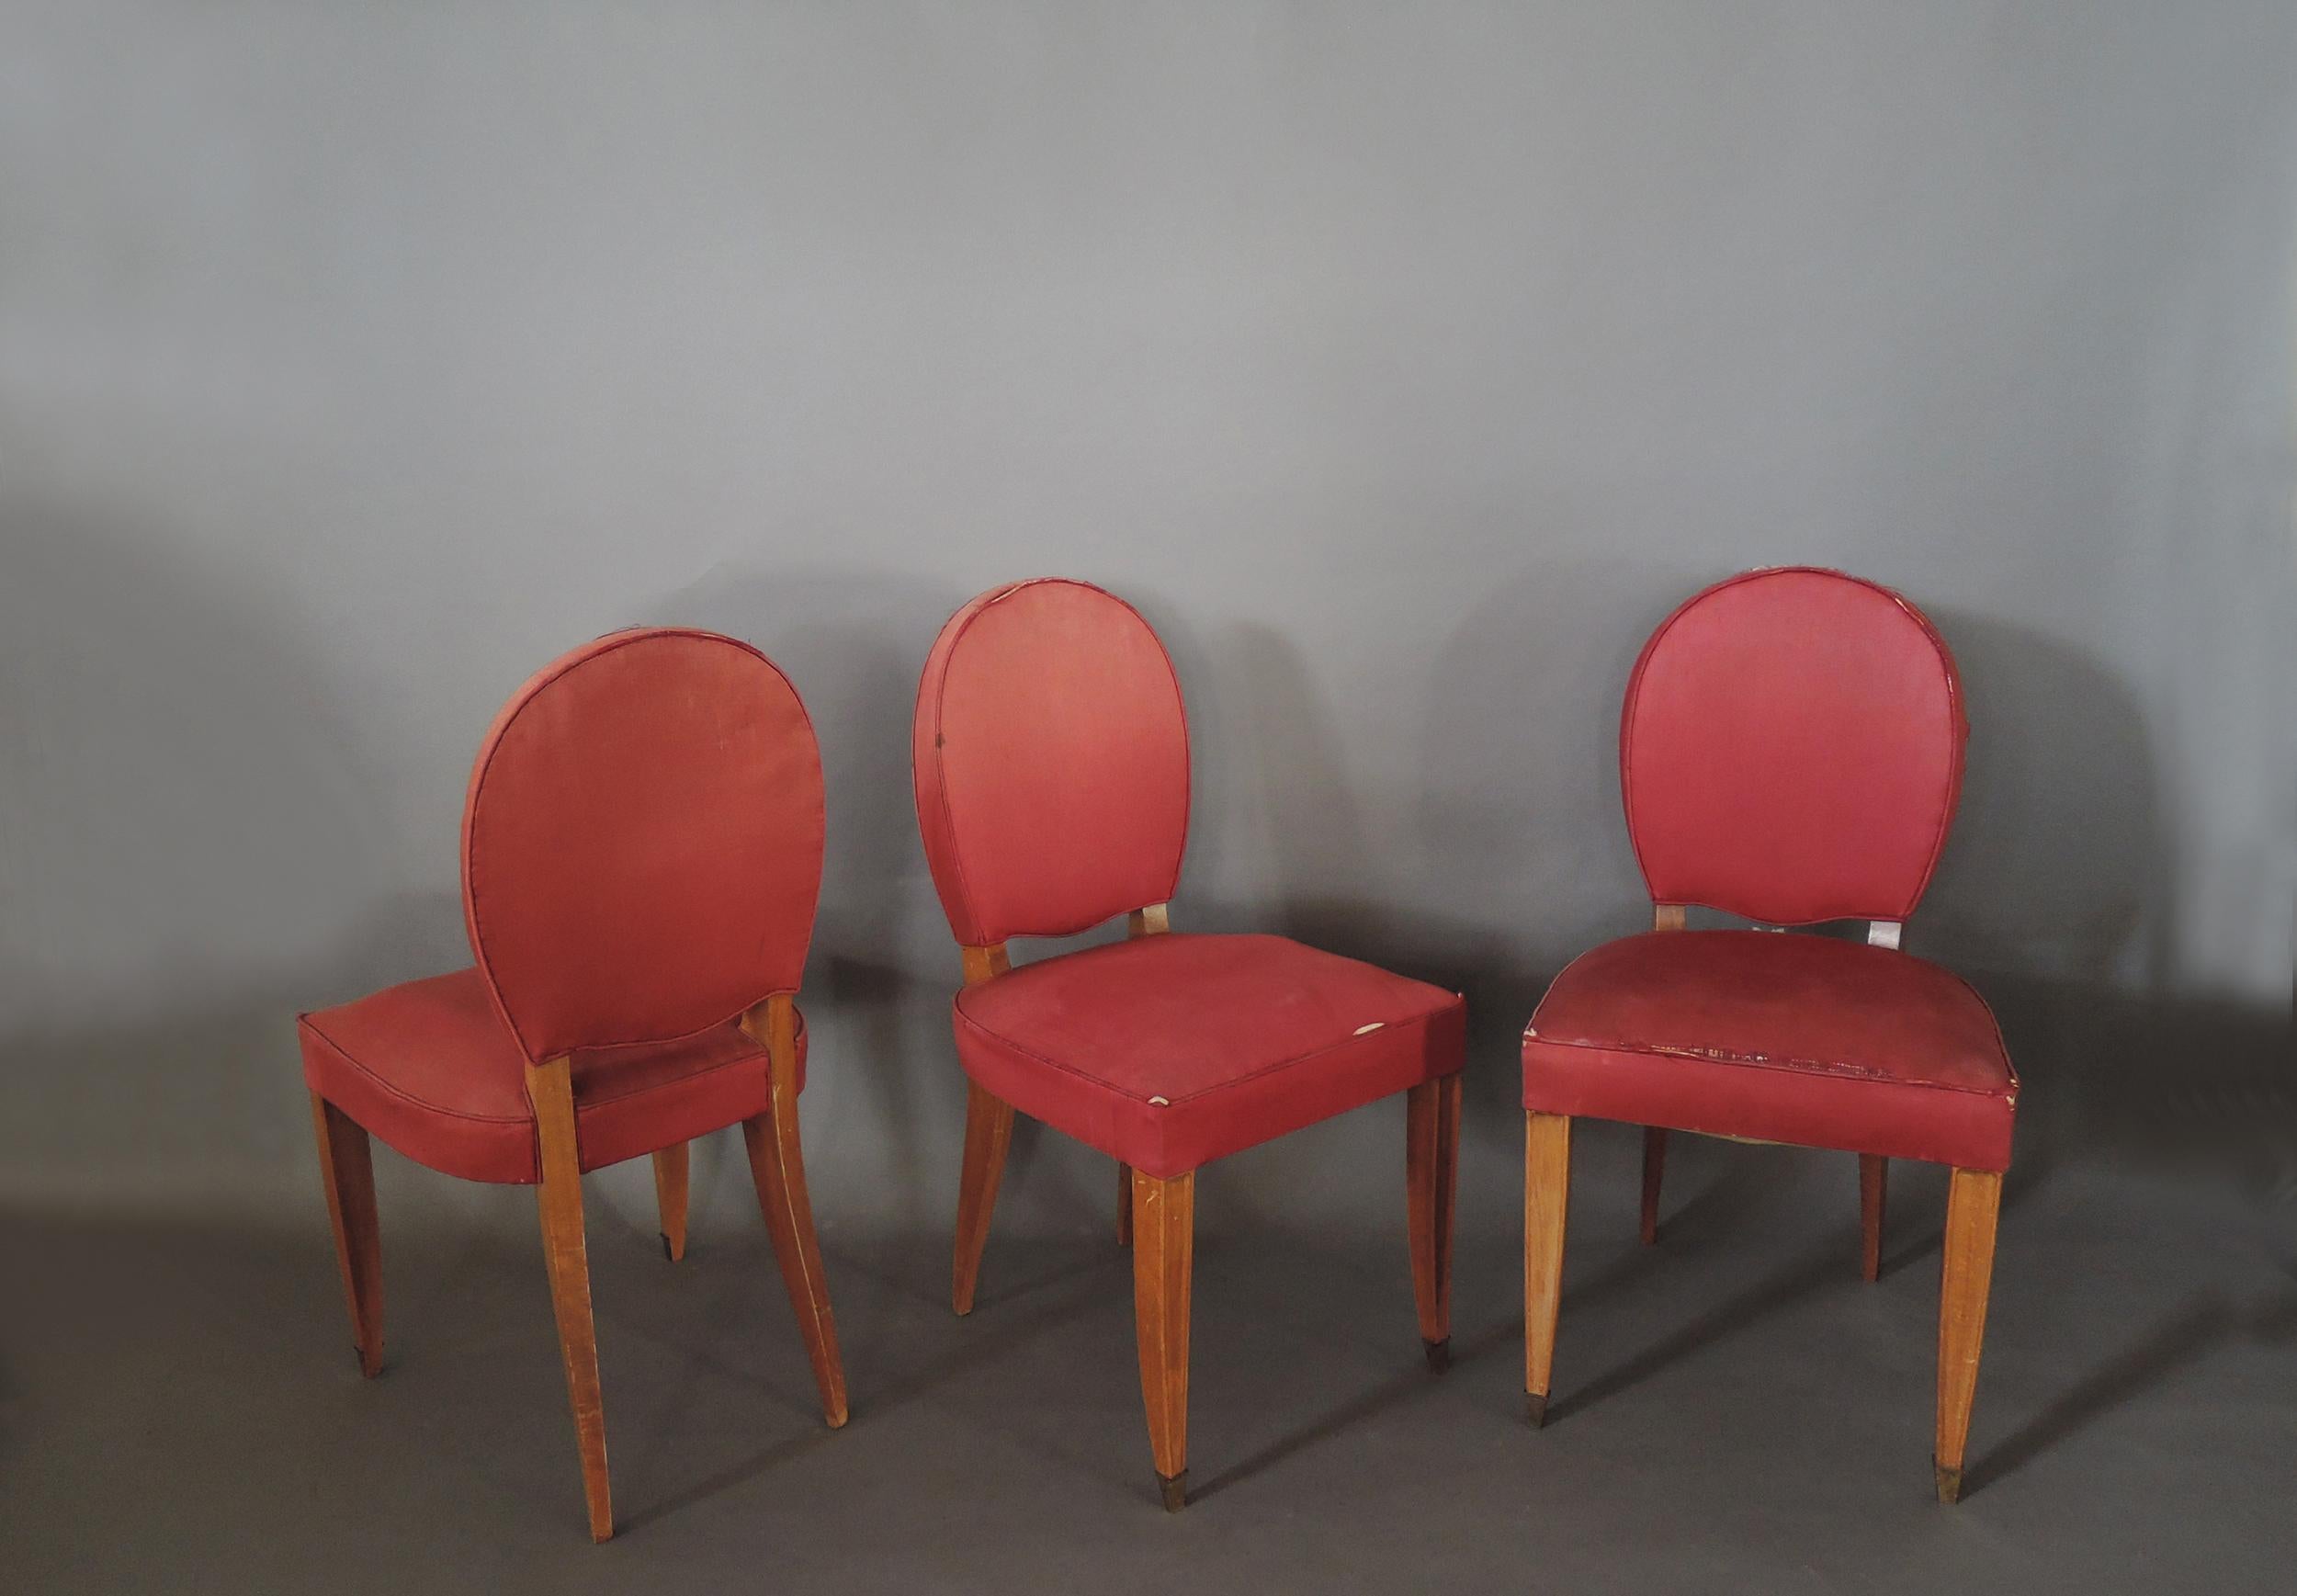 15 Fine French Art Deco Dining Chairs 8